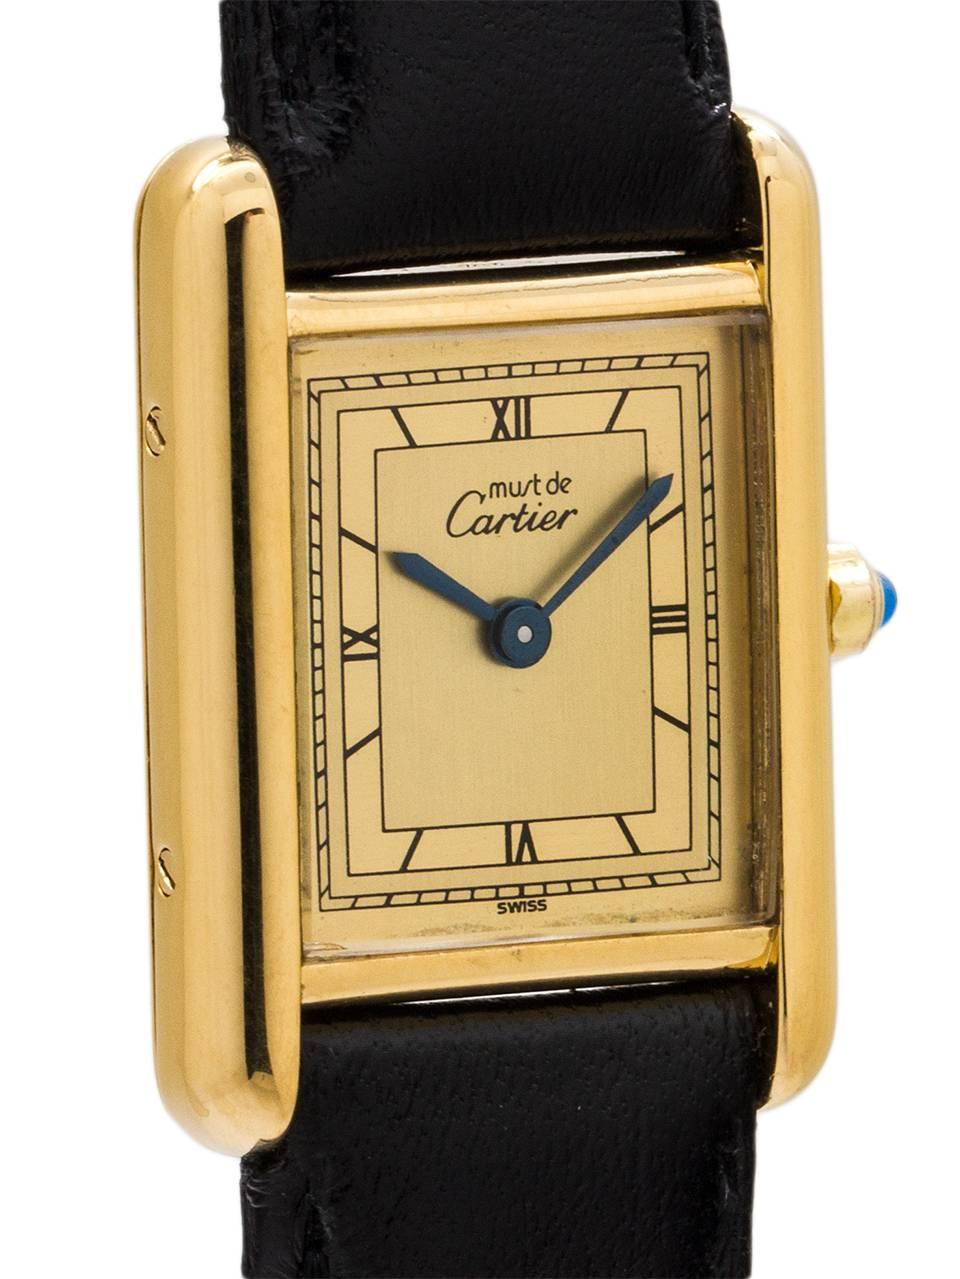 
Cartier Lady's Vermeil Tank Louis Must de Cartier, circa 1990's. Vermeil, 20 microns gold over silver, 22 X 29mm case secured by 4 side screws and 4 case back screws. Featuring an original cream color dial with fine Roman figures and blued steel